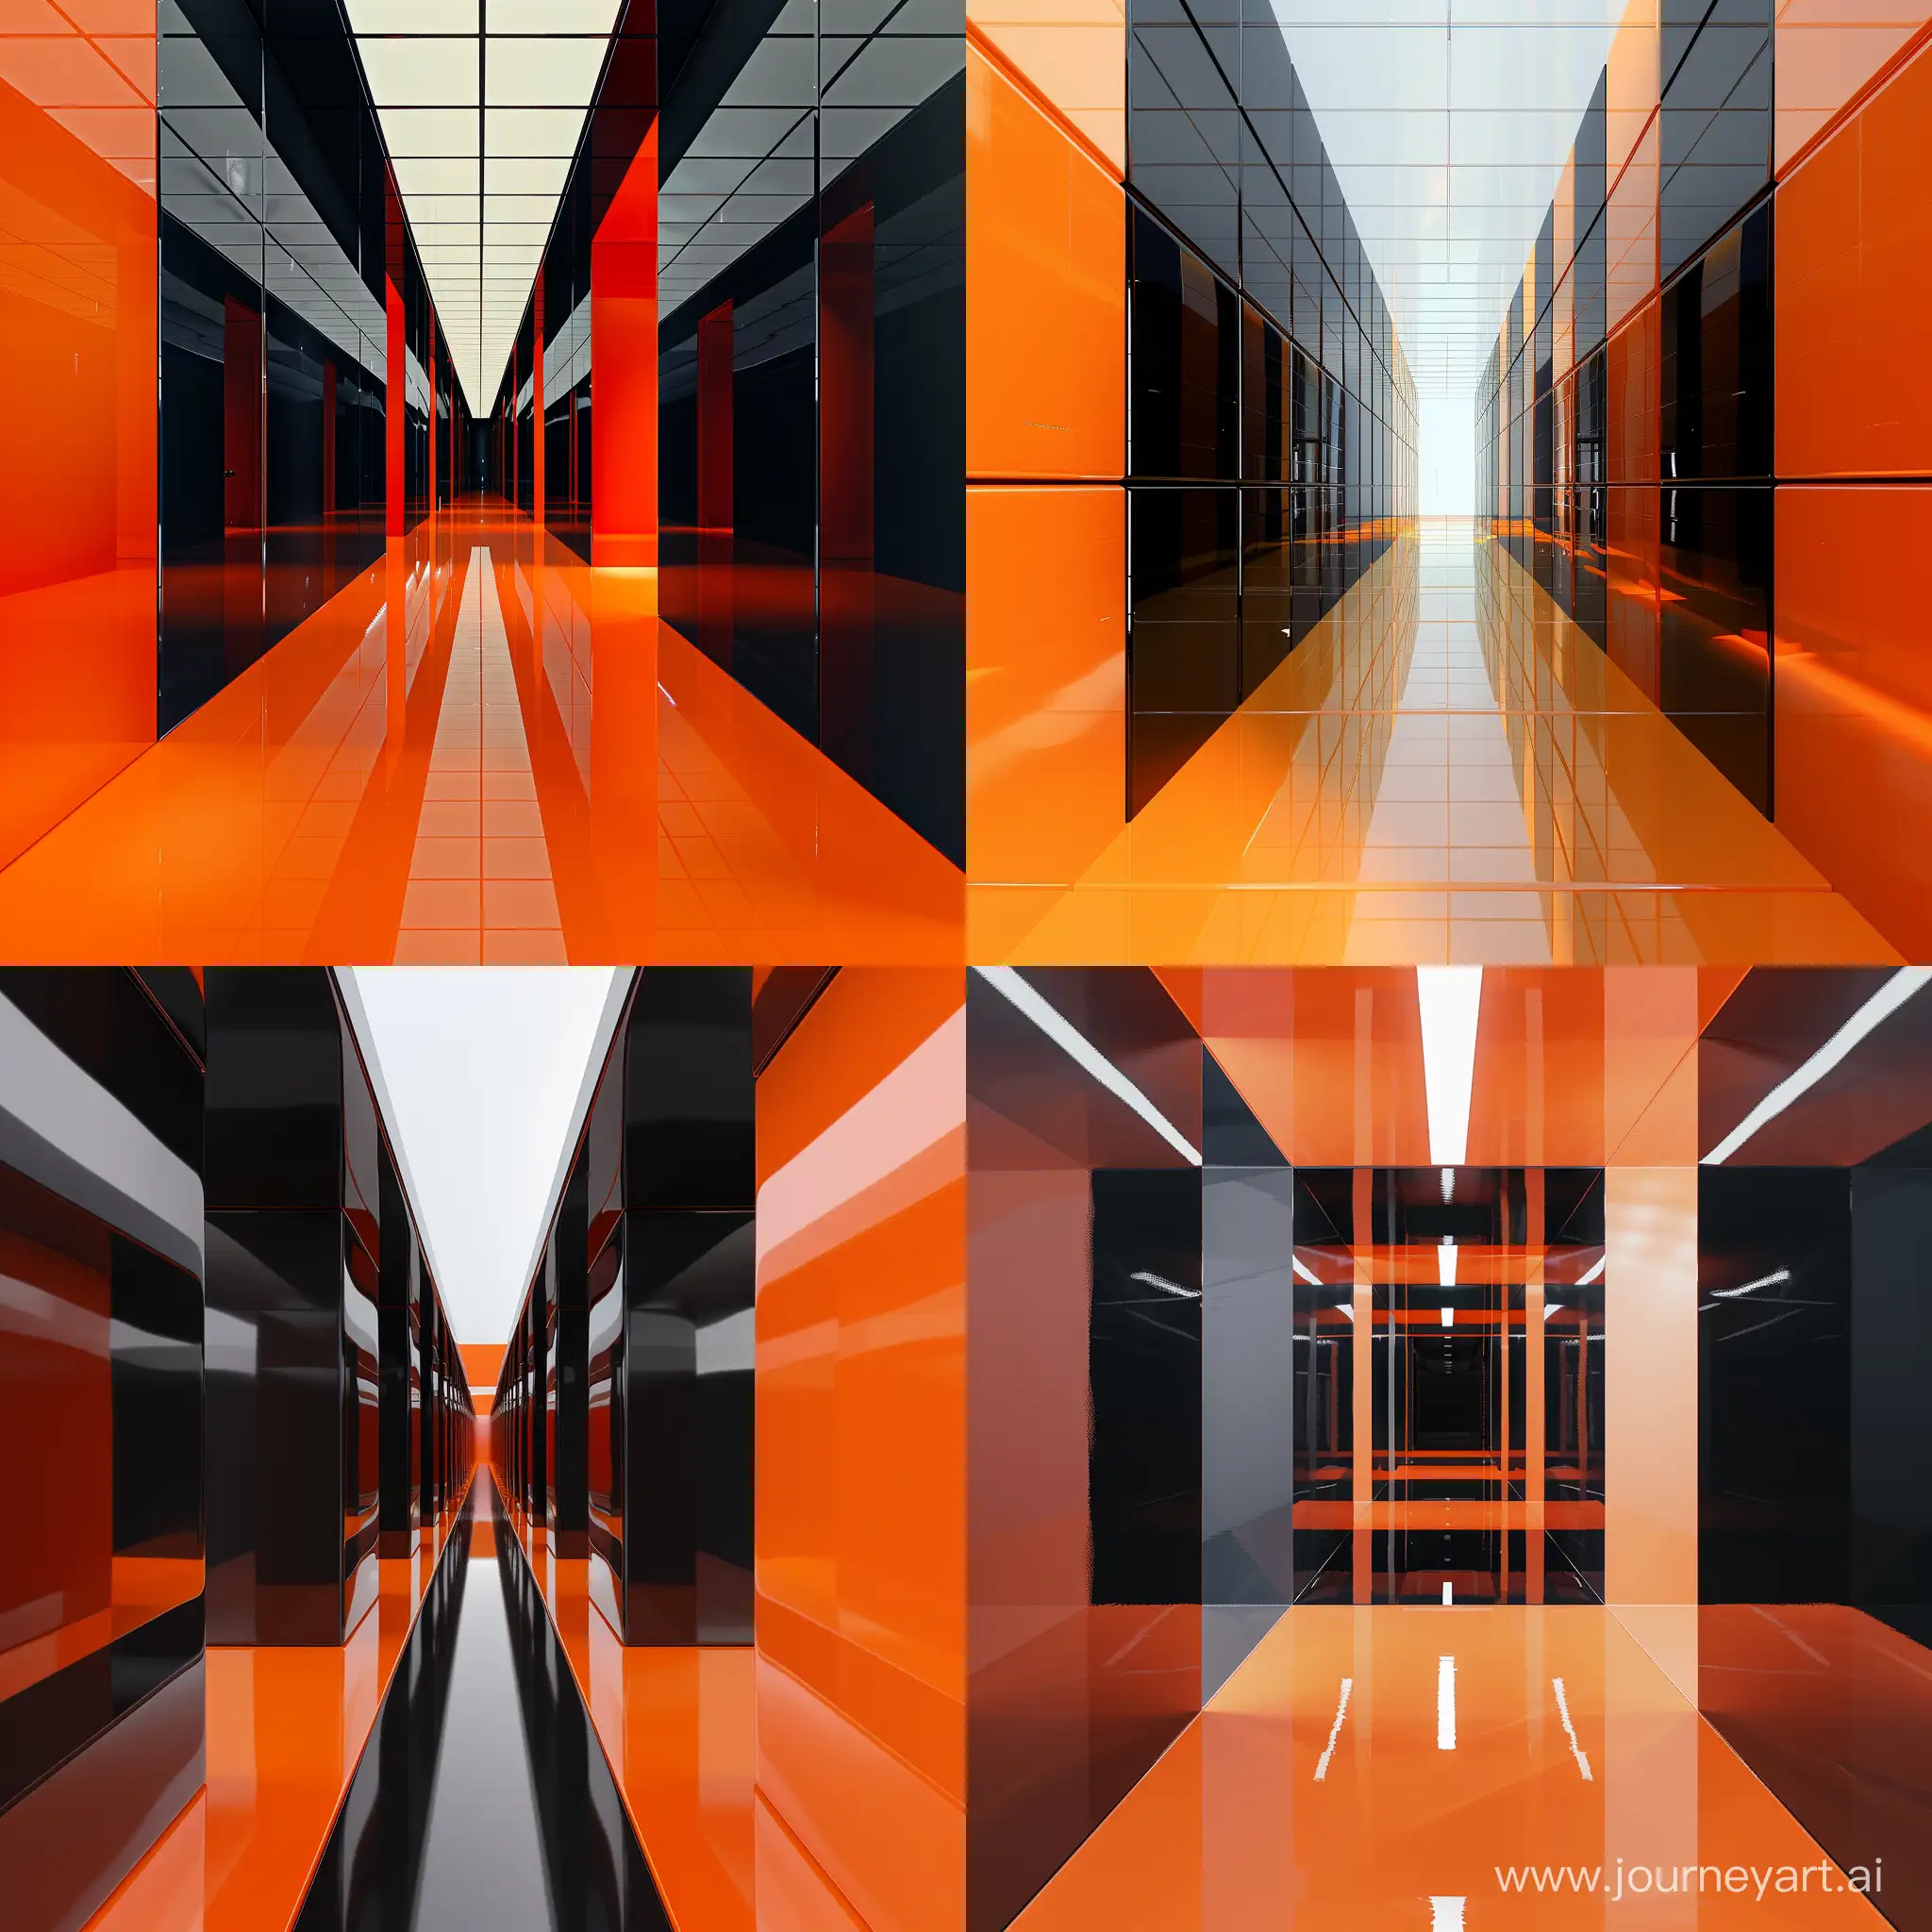 Two glossy painted cubes of black and orange,camera is looking up from the bottom of the aisle of the cubes, photo realistic, high resolution, unreal quality